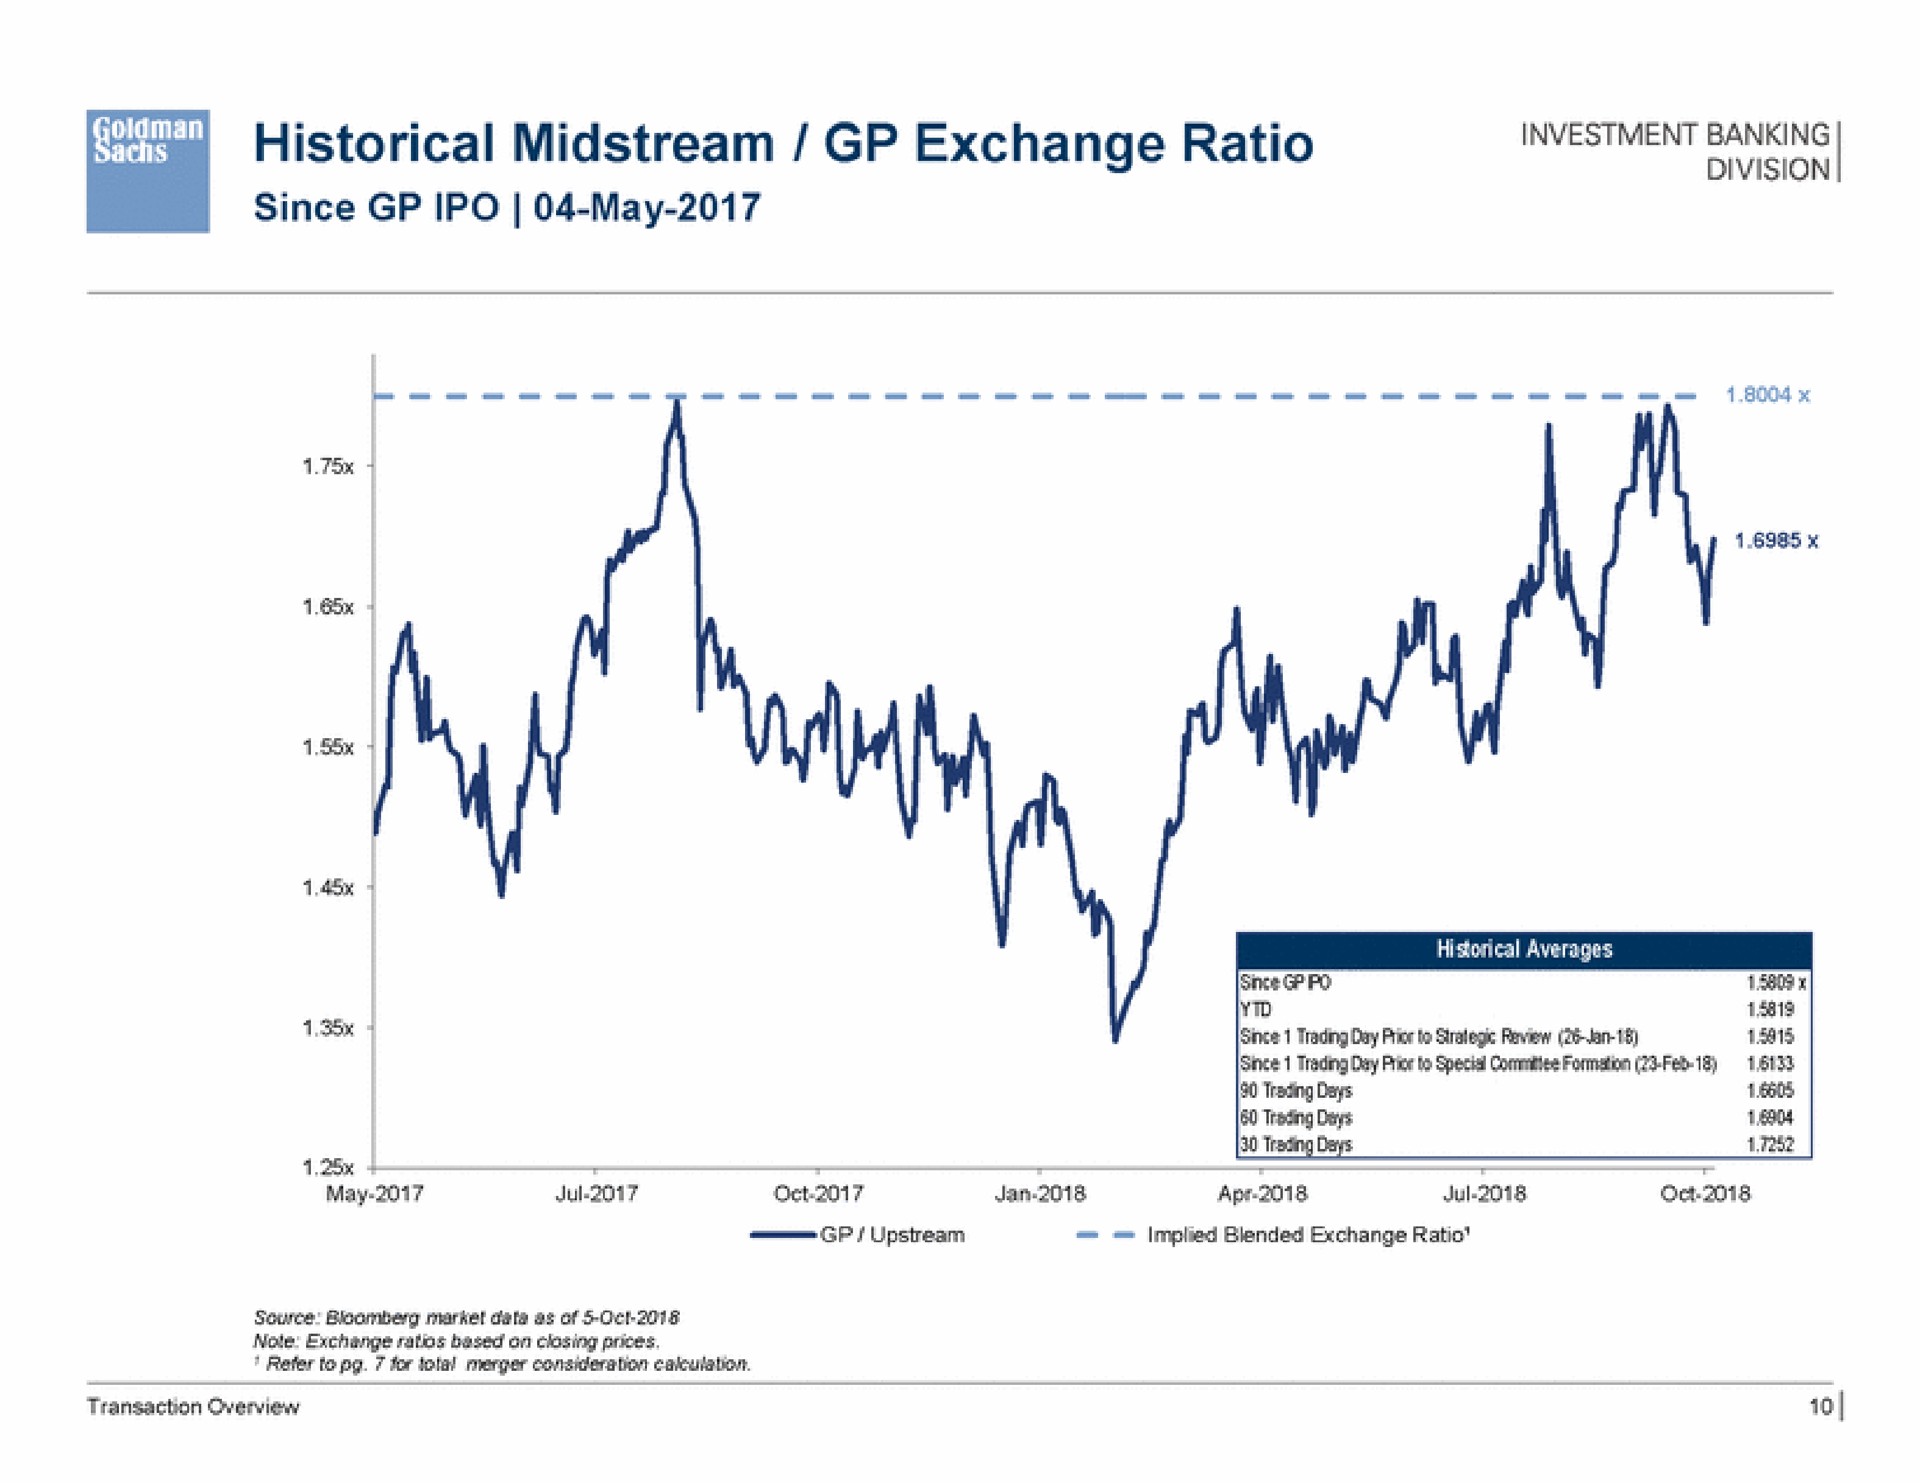 a historical midstream exchange ratio since may | Goldman Sachs